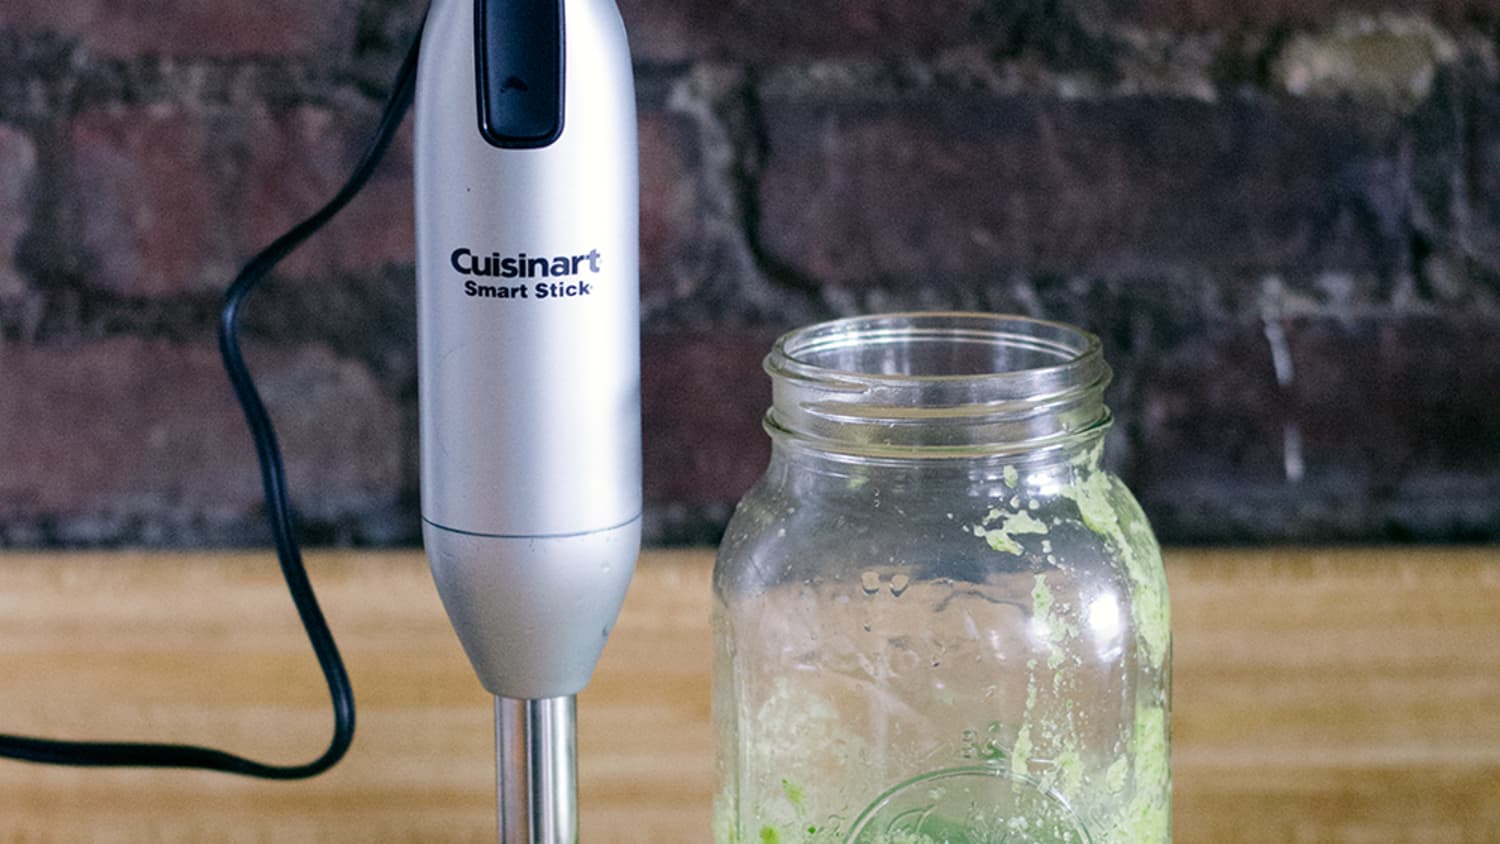 What's the Best Way to Clean Your Immersion Blender?